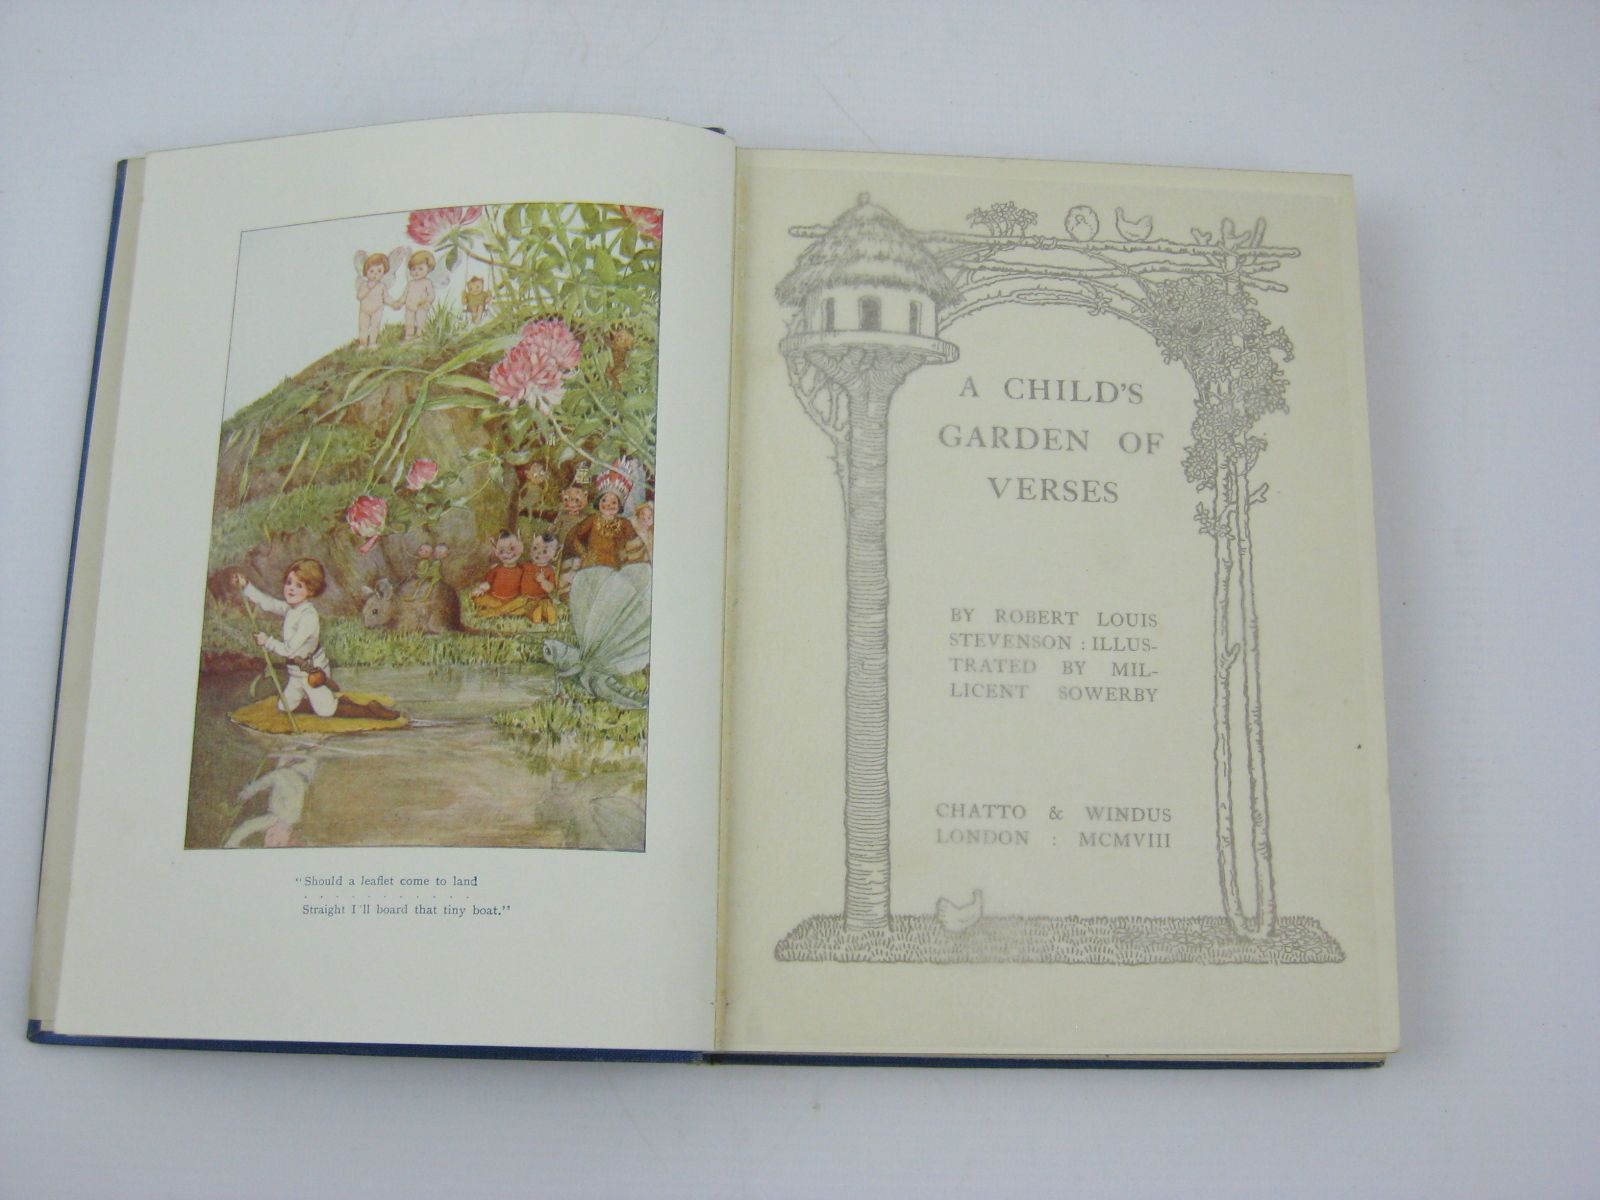 Photo of A CHILD'S GARDEN OF VERSES written by Stevenson, Robert Louis illustrated by Sowerby, Millicent published by Chatto & Windus (STOCK CODE: 1506917)  for sale by Stella & Rose's Books